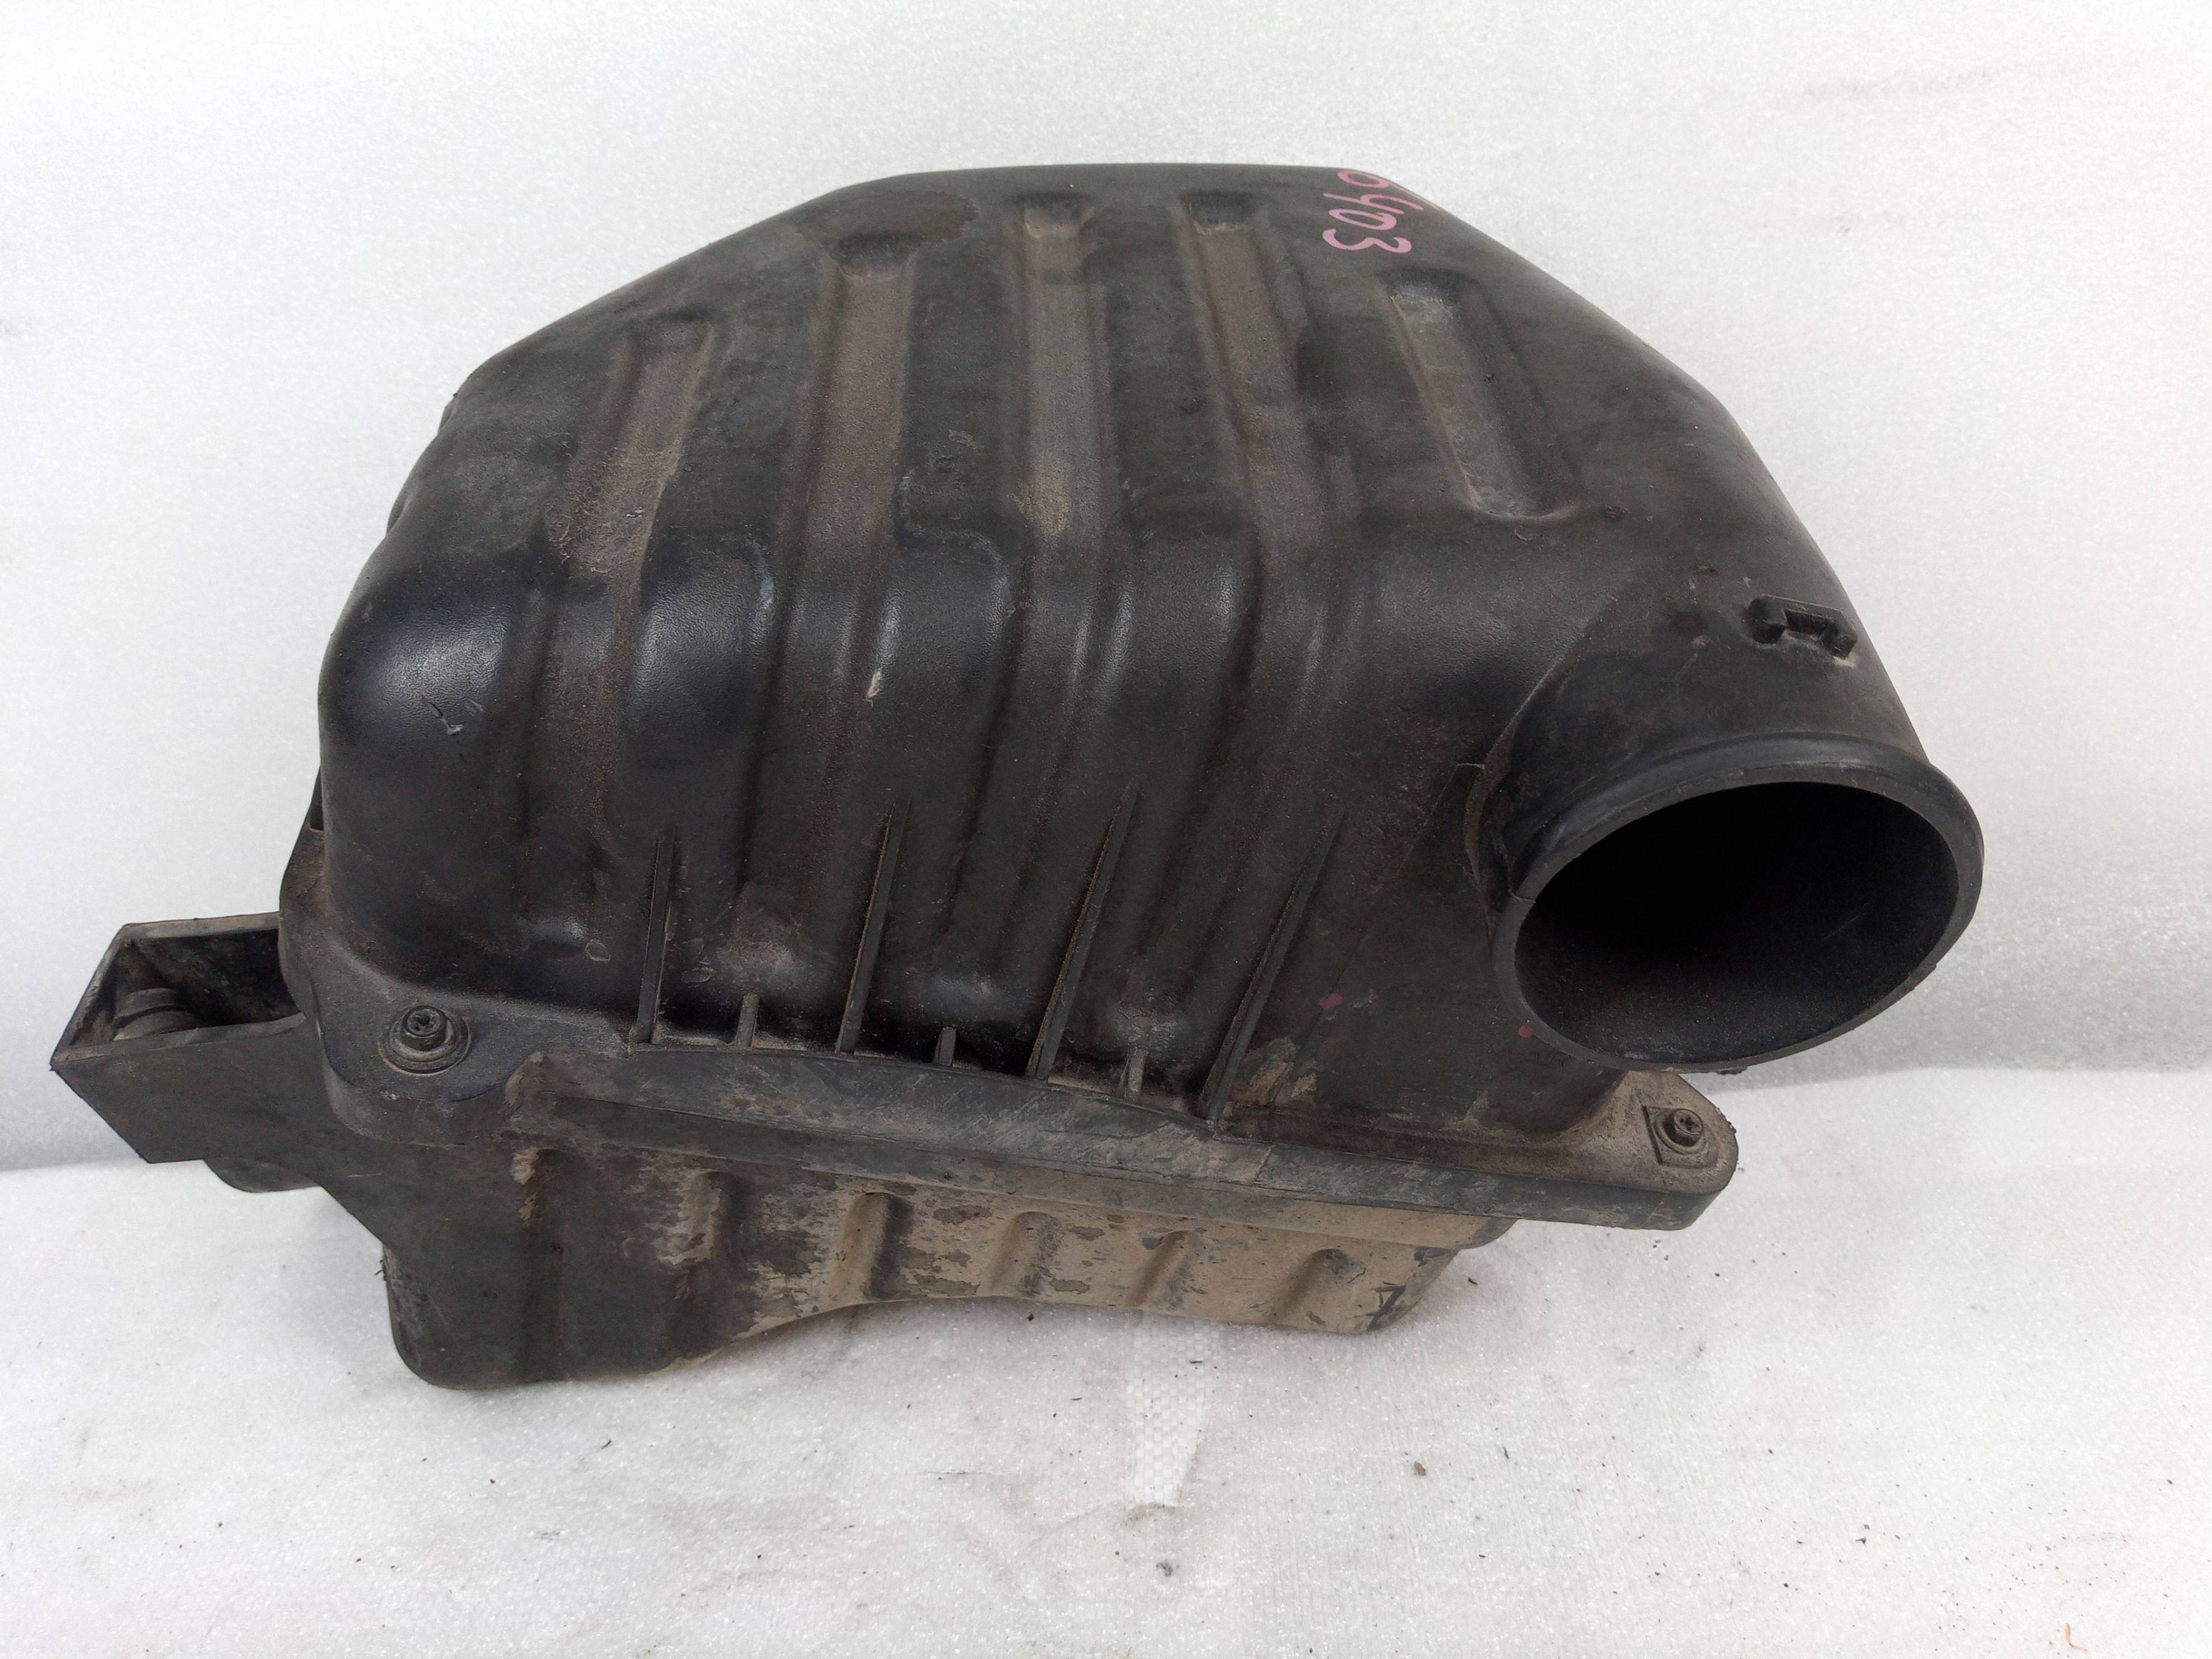 OPEL Antara 1 generation (2006-2015) Other Engine Compartment Parts 96628880 23967005